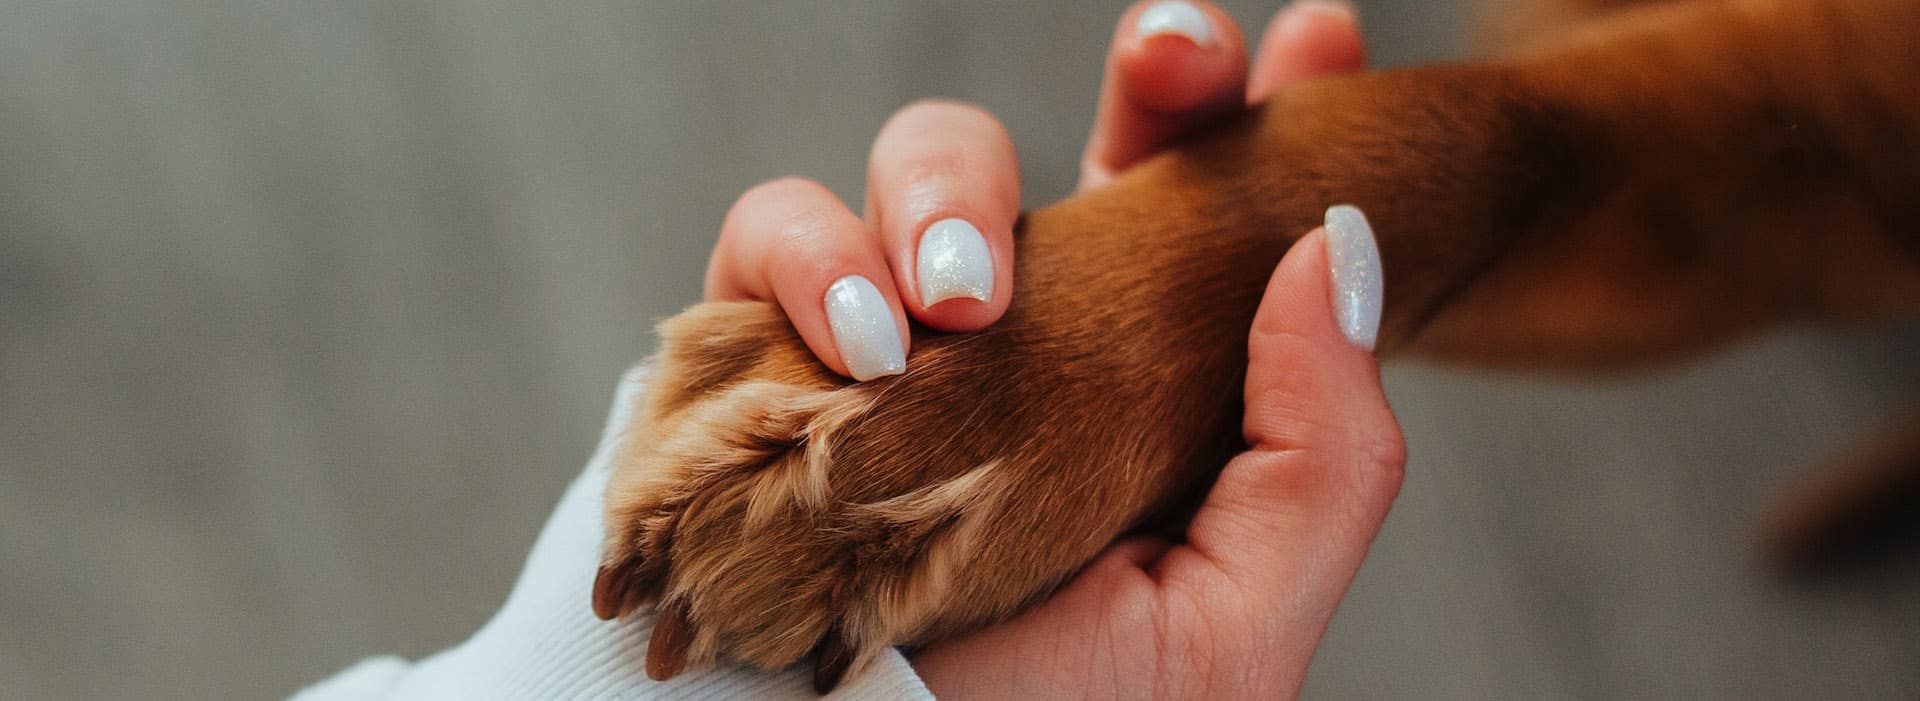 A woman's hands hold a dog's paw lovingly.